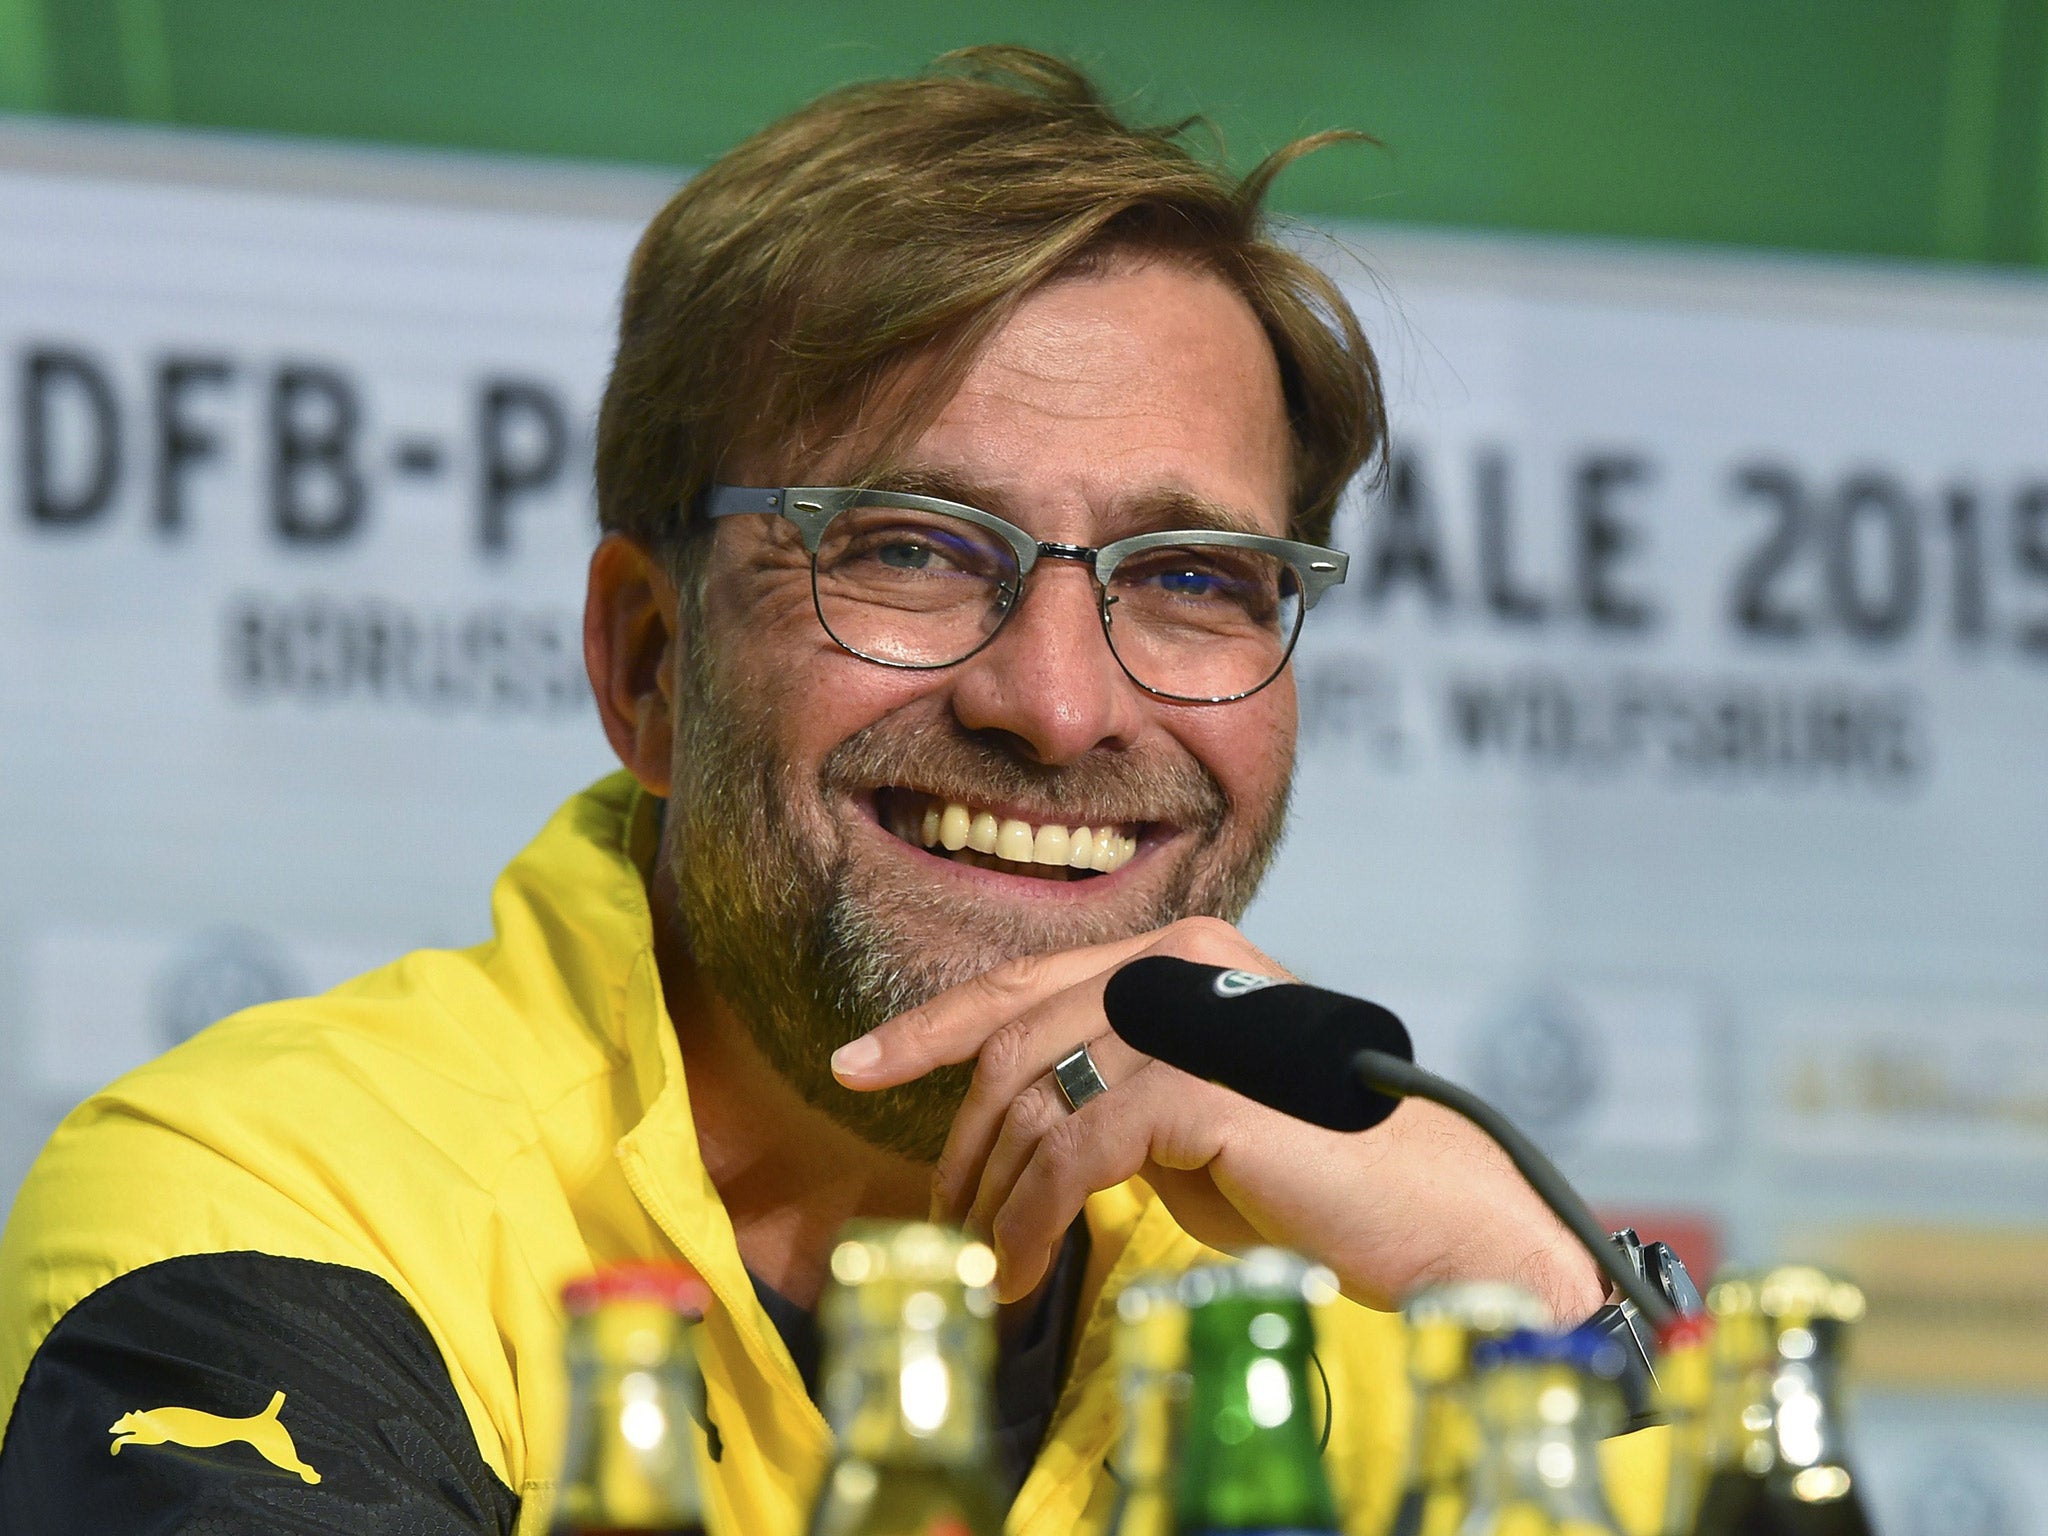 The signing of Klopp represents a major coup for Liverpool